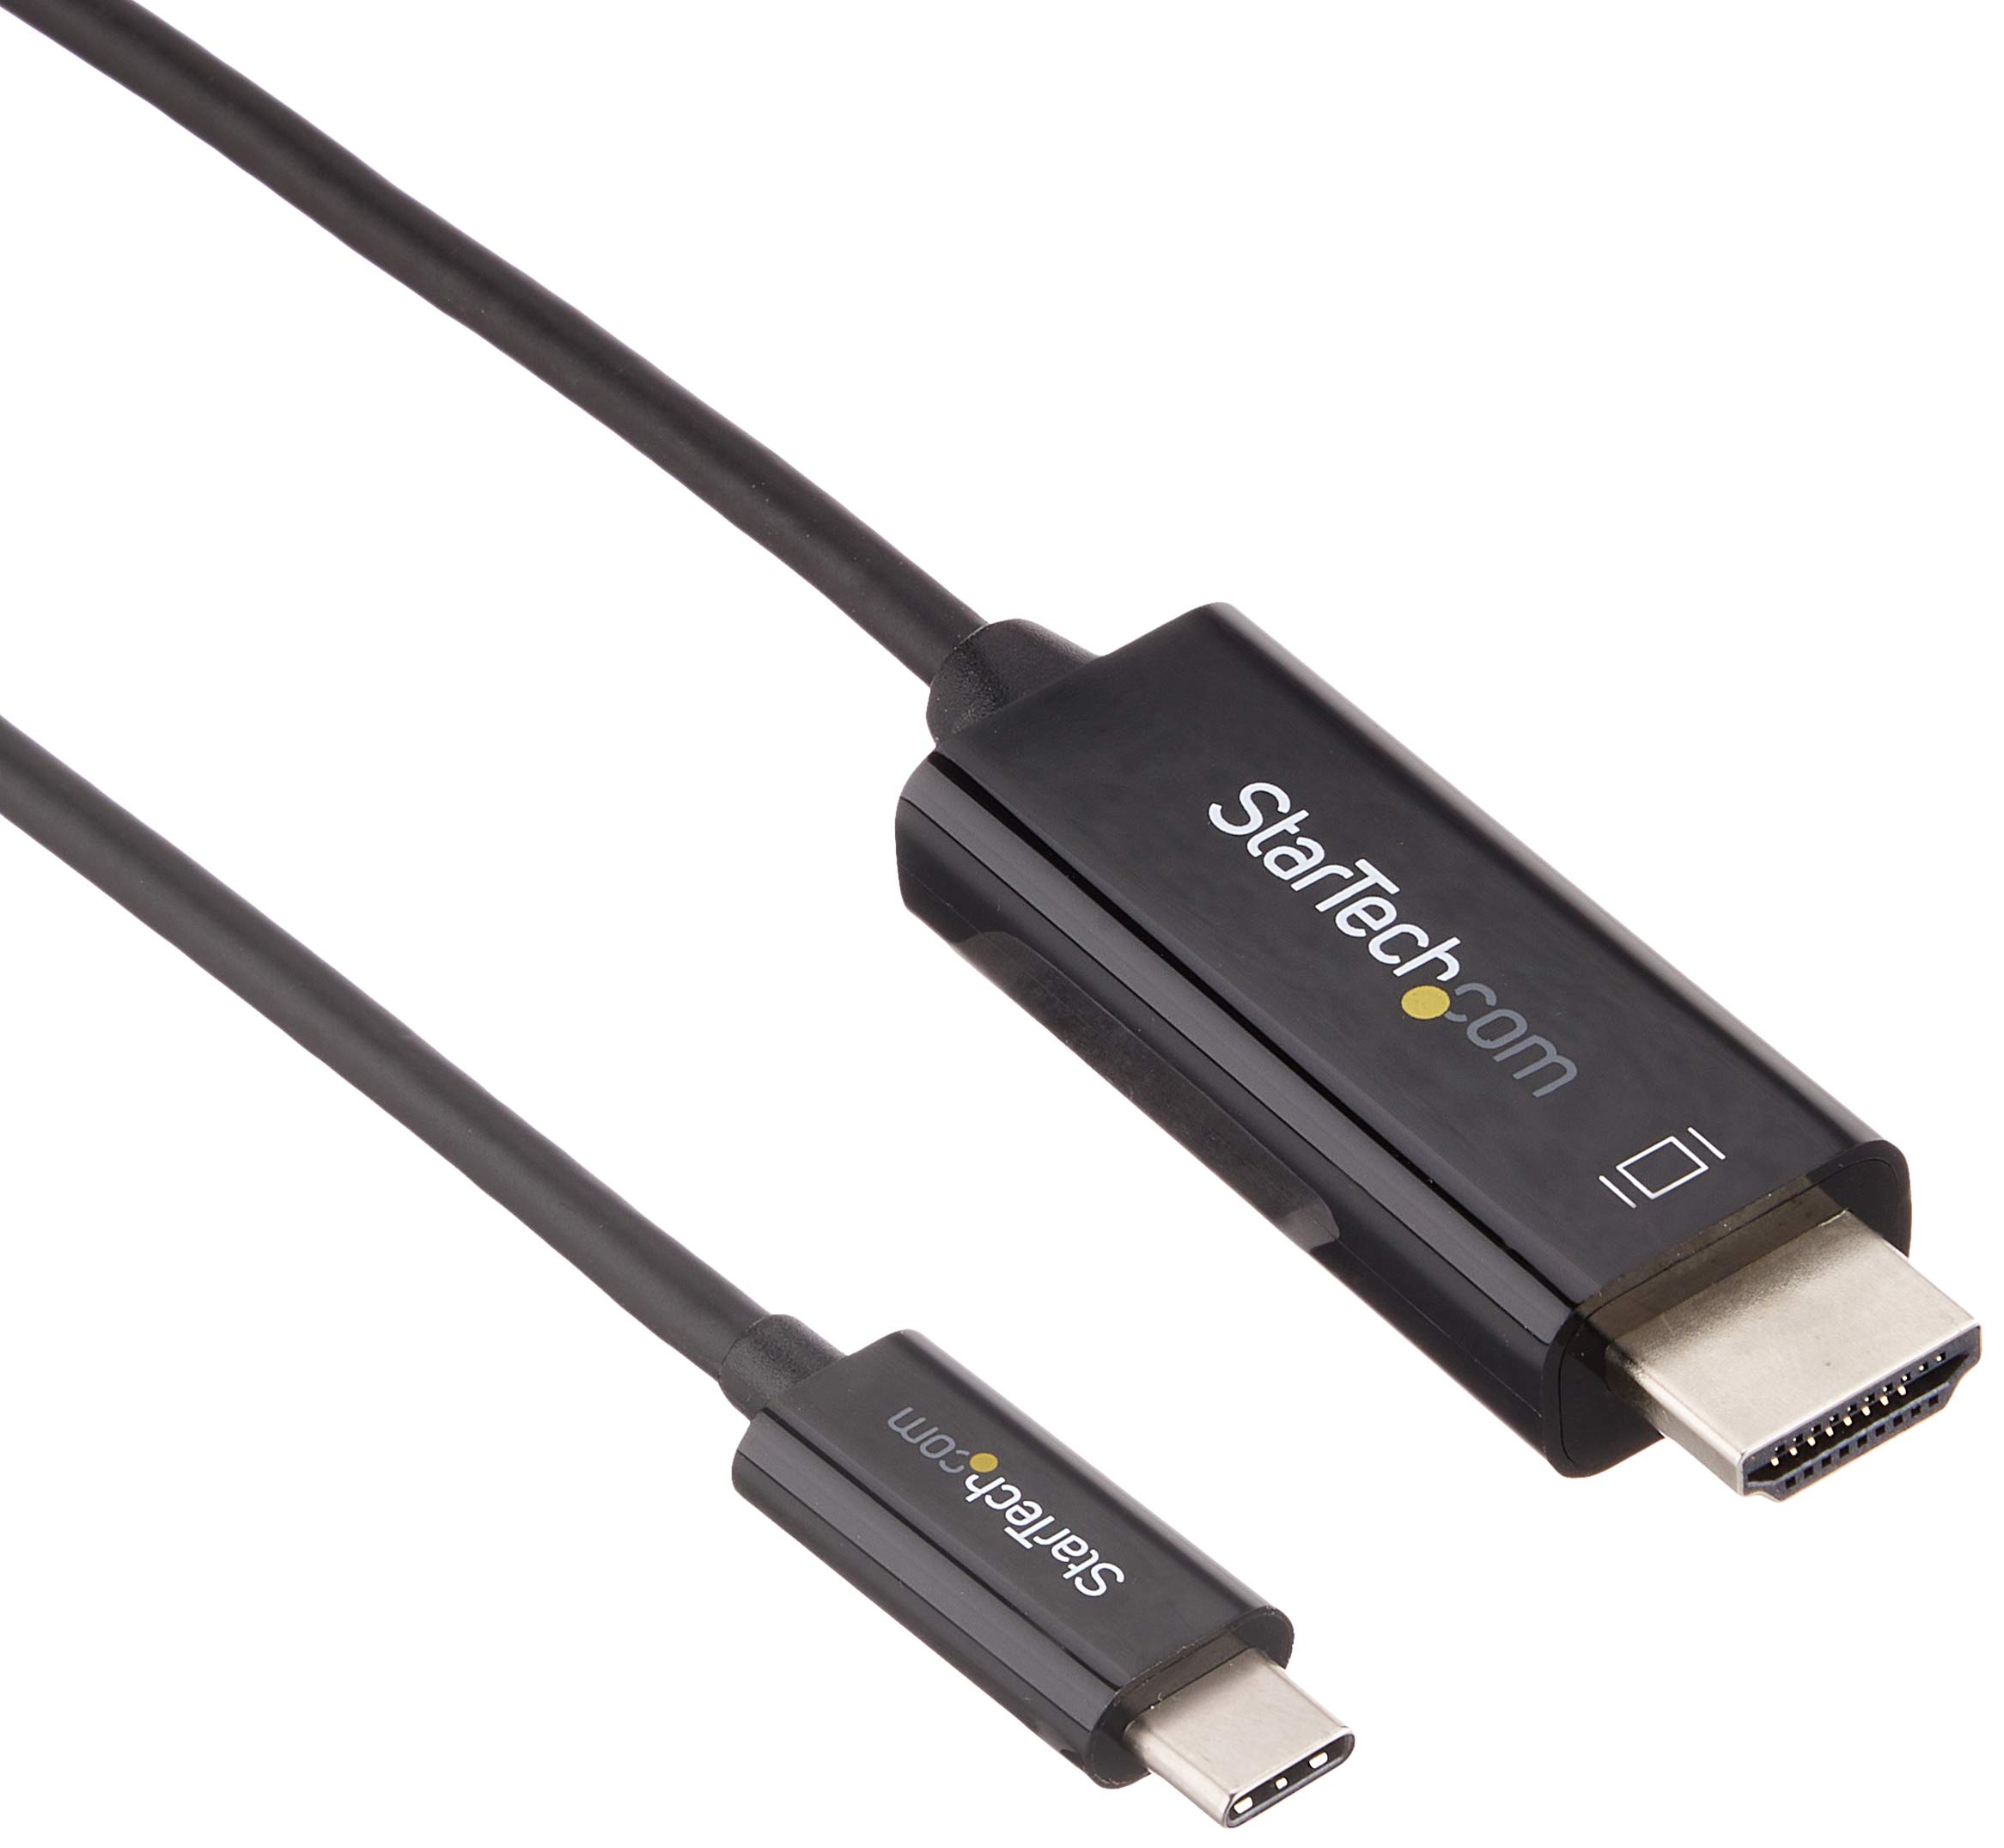 StarTech.com 3ft (1m) USB C to HDMI Cable - 4K 60Hz USB Type C to HDMI 2.0 Video Adapter Cable - Thunderbolt 3 Compatible - Laptop to HDMI Monitor/Display - DP 1.2 Alt Mode HBR2 - Black (CDP2HD1MBNL)